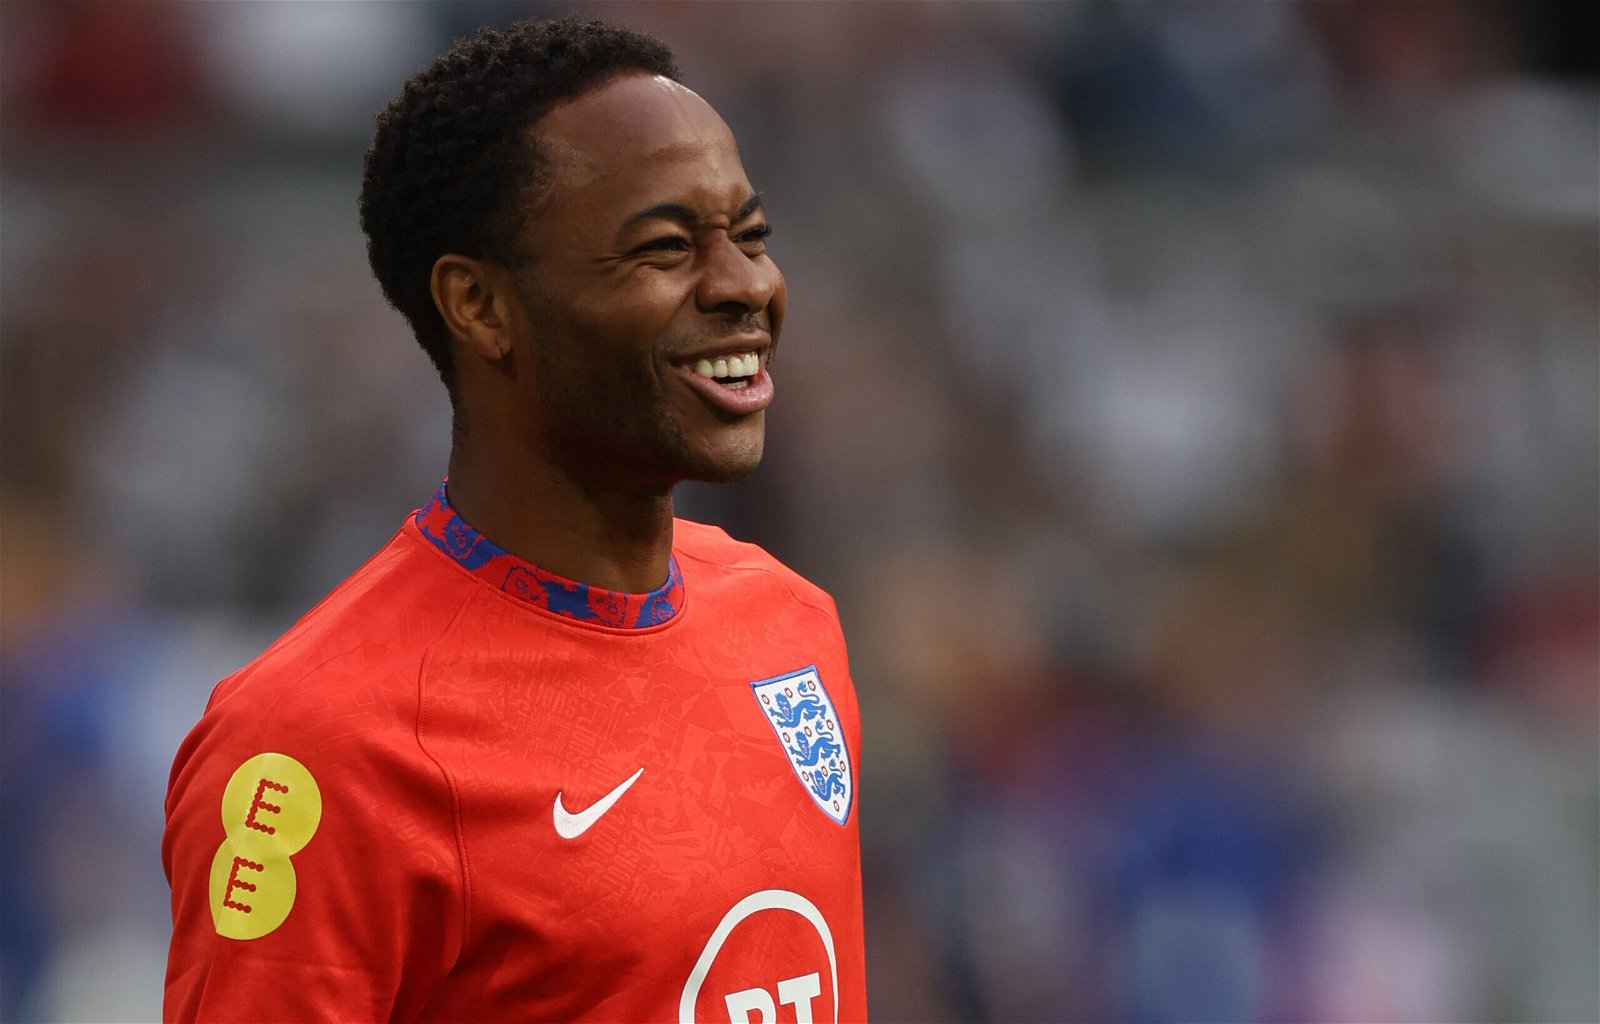 Raheem-Sterling-preparing-for-international-action-with-England